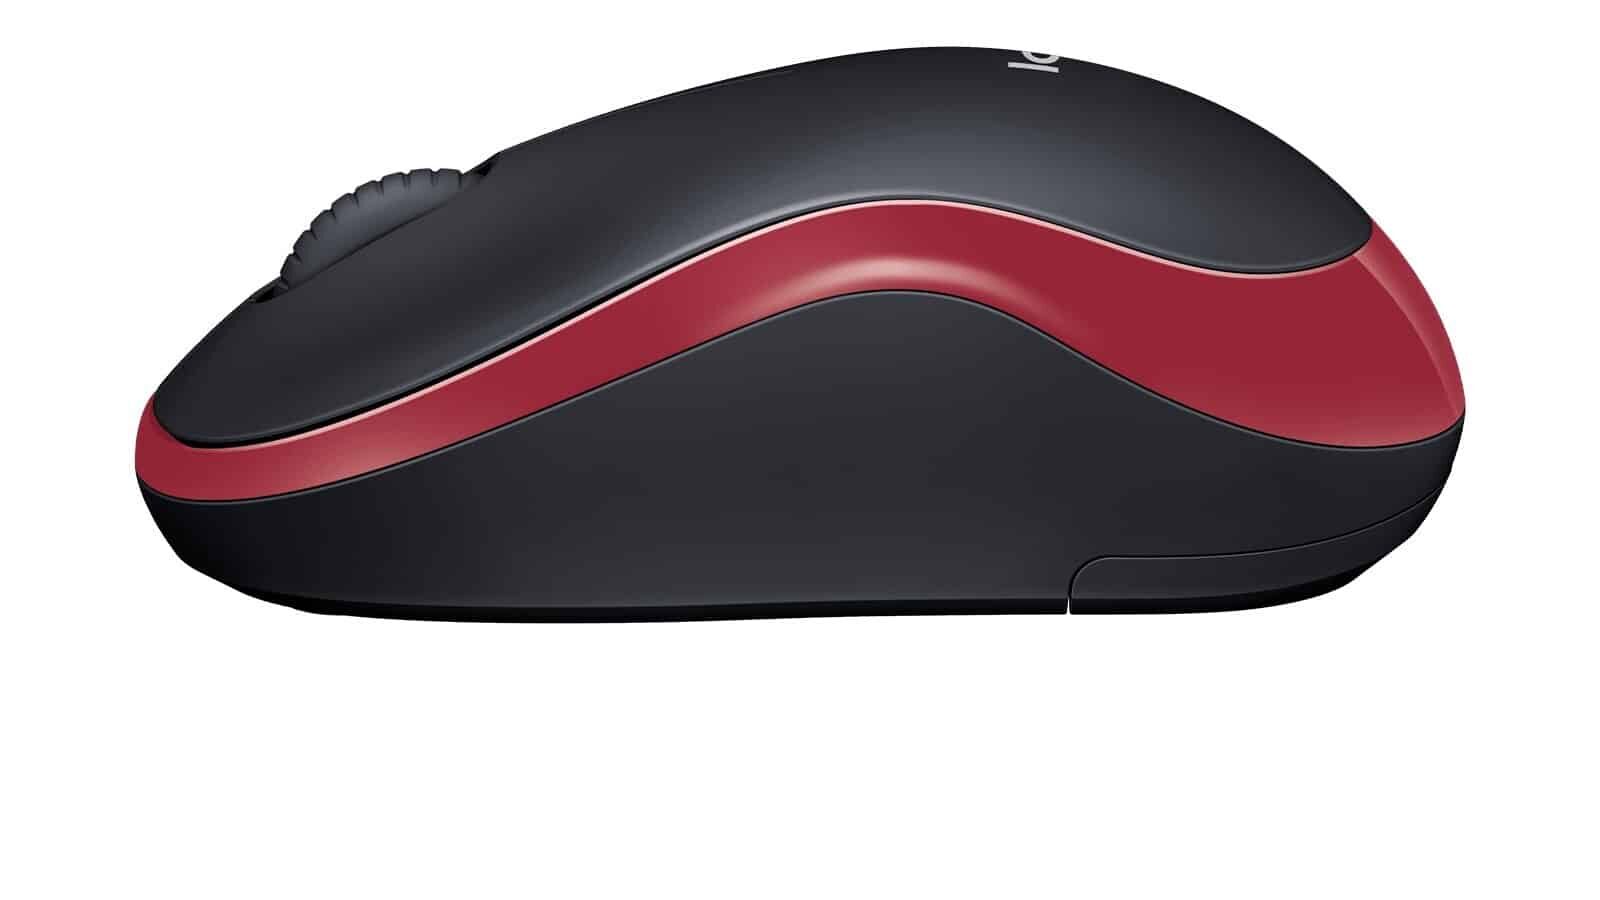 Logitech M185 Wireless Notebook Mouse – Black/Red